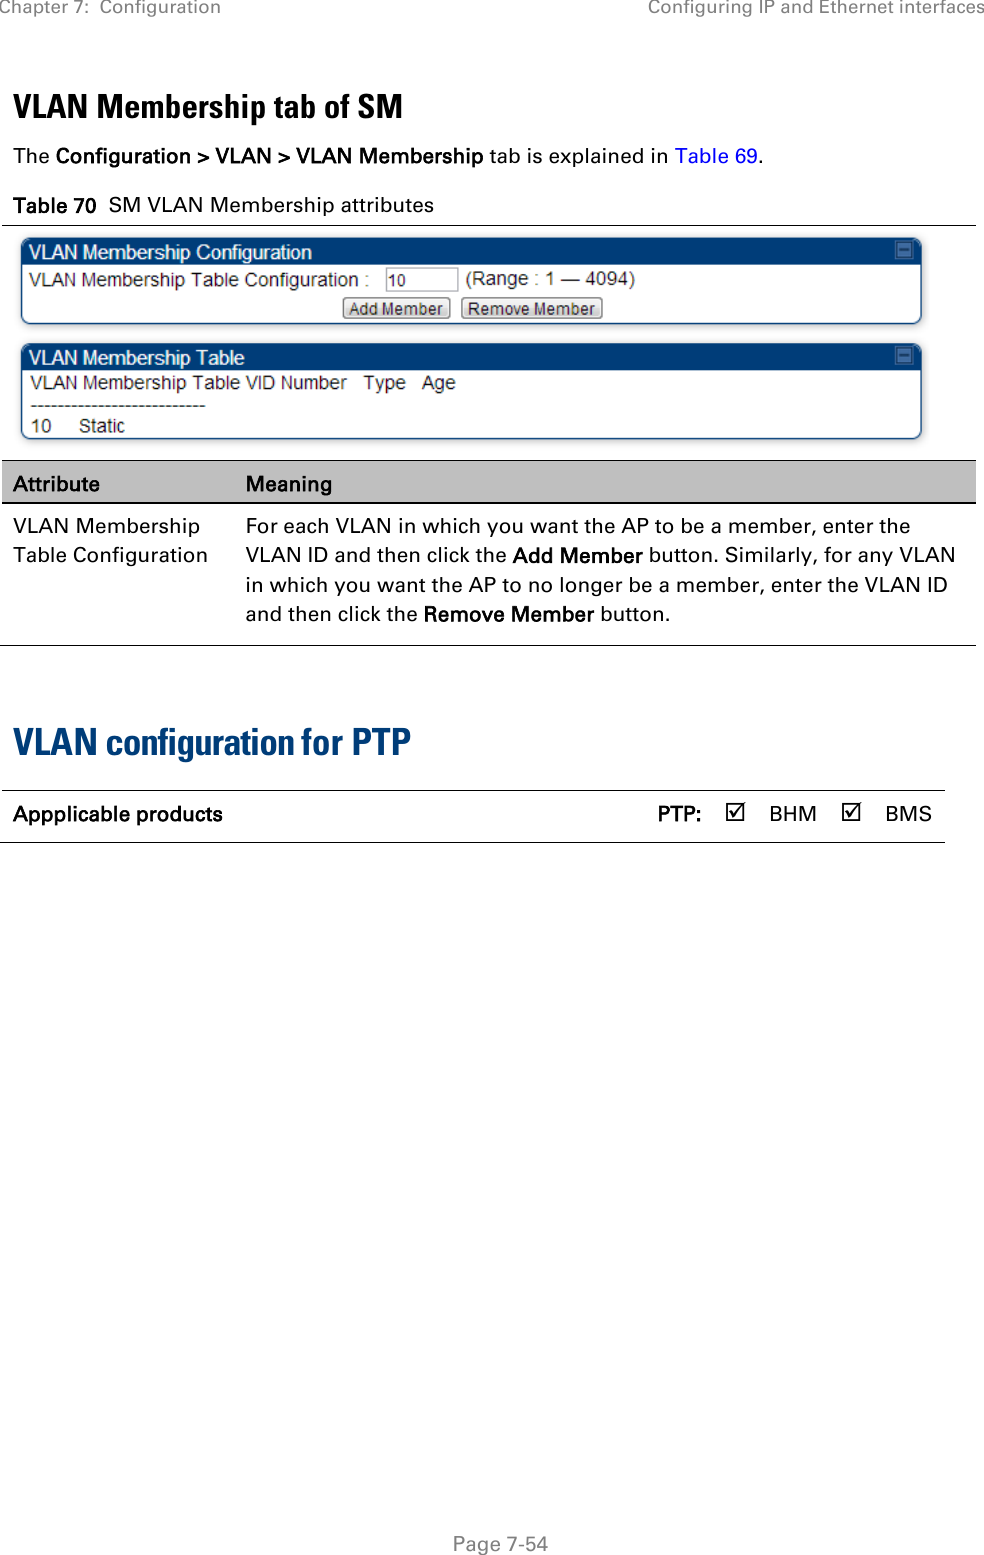 Chapter 7:  Configuration Configuring IP and Ethernet interfaces   Page 7-54 VLAN Membership tab of SM The Configuration &gt; VLAN &gt; VLAN Membership tab is explained in Table 69. Table 70  SM VLAN Membership attributes  Attribute Meaning VLAN Membership Table Configuration For each VLAN in which you want the AP to be a member, enter the VLAN ID and then click the Add Member button. Similarly, for any VLAN in which you want the AP to no longer be a member, enter the VLAN ID and then click the Remove Member button.  VLAN configuration for PTP Appplicable products      PTP:  BHM  BMS  